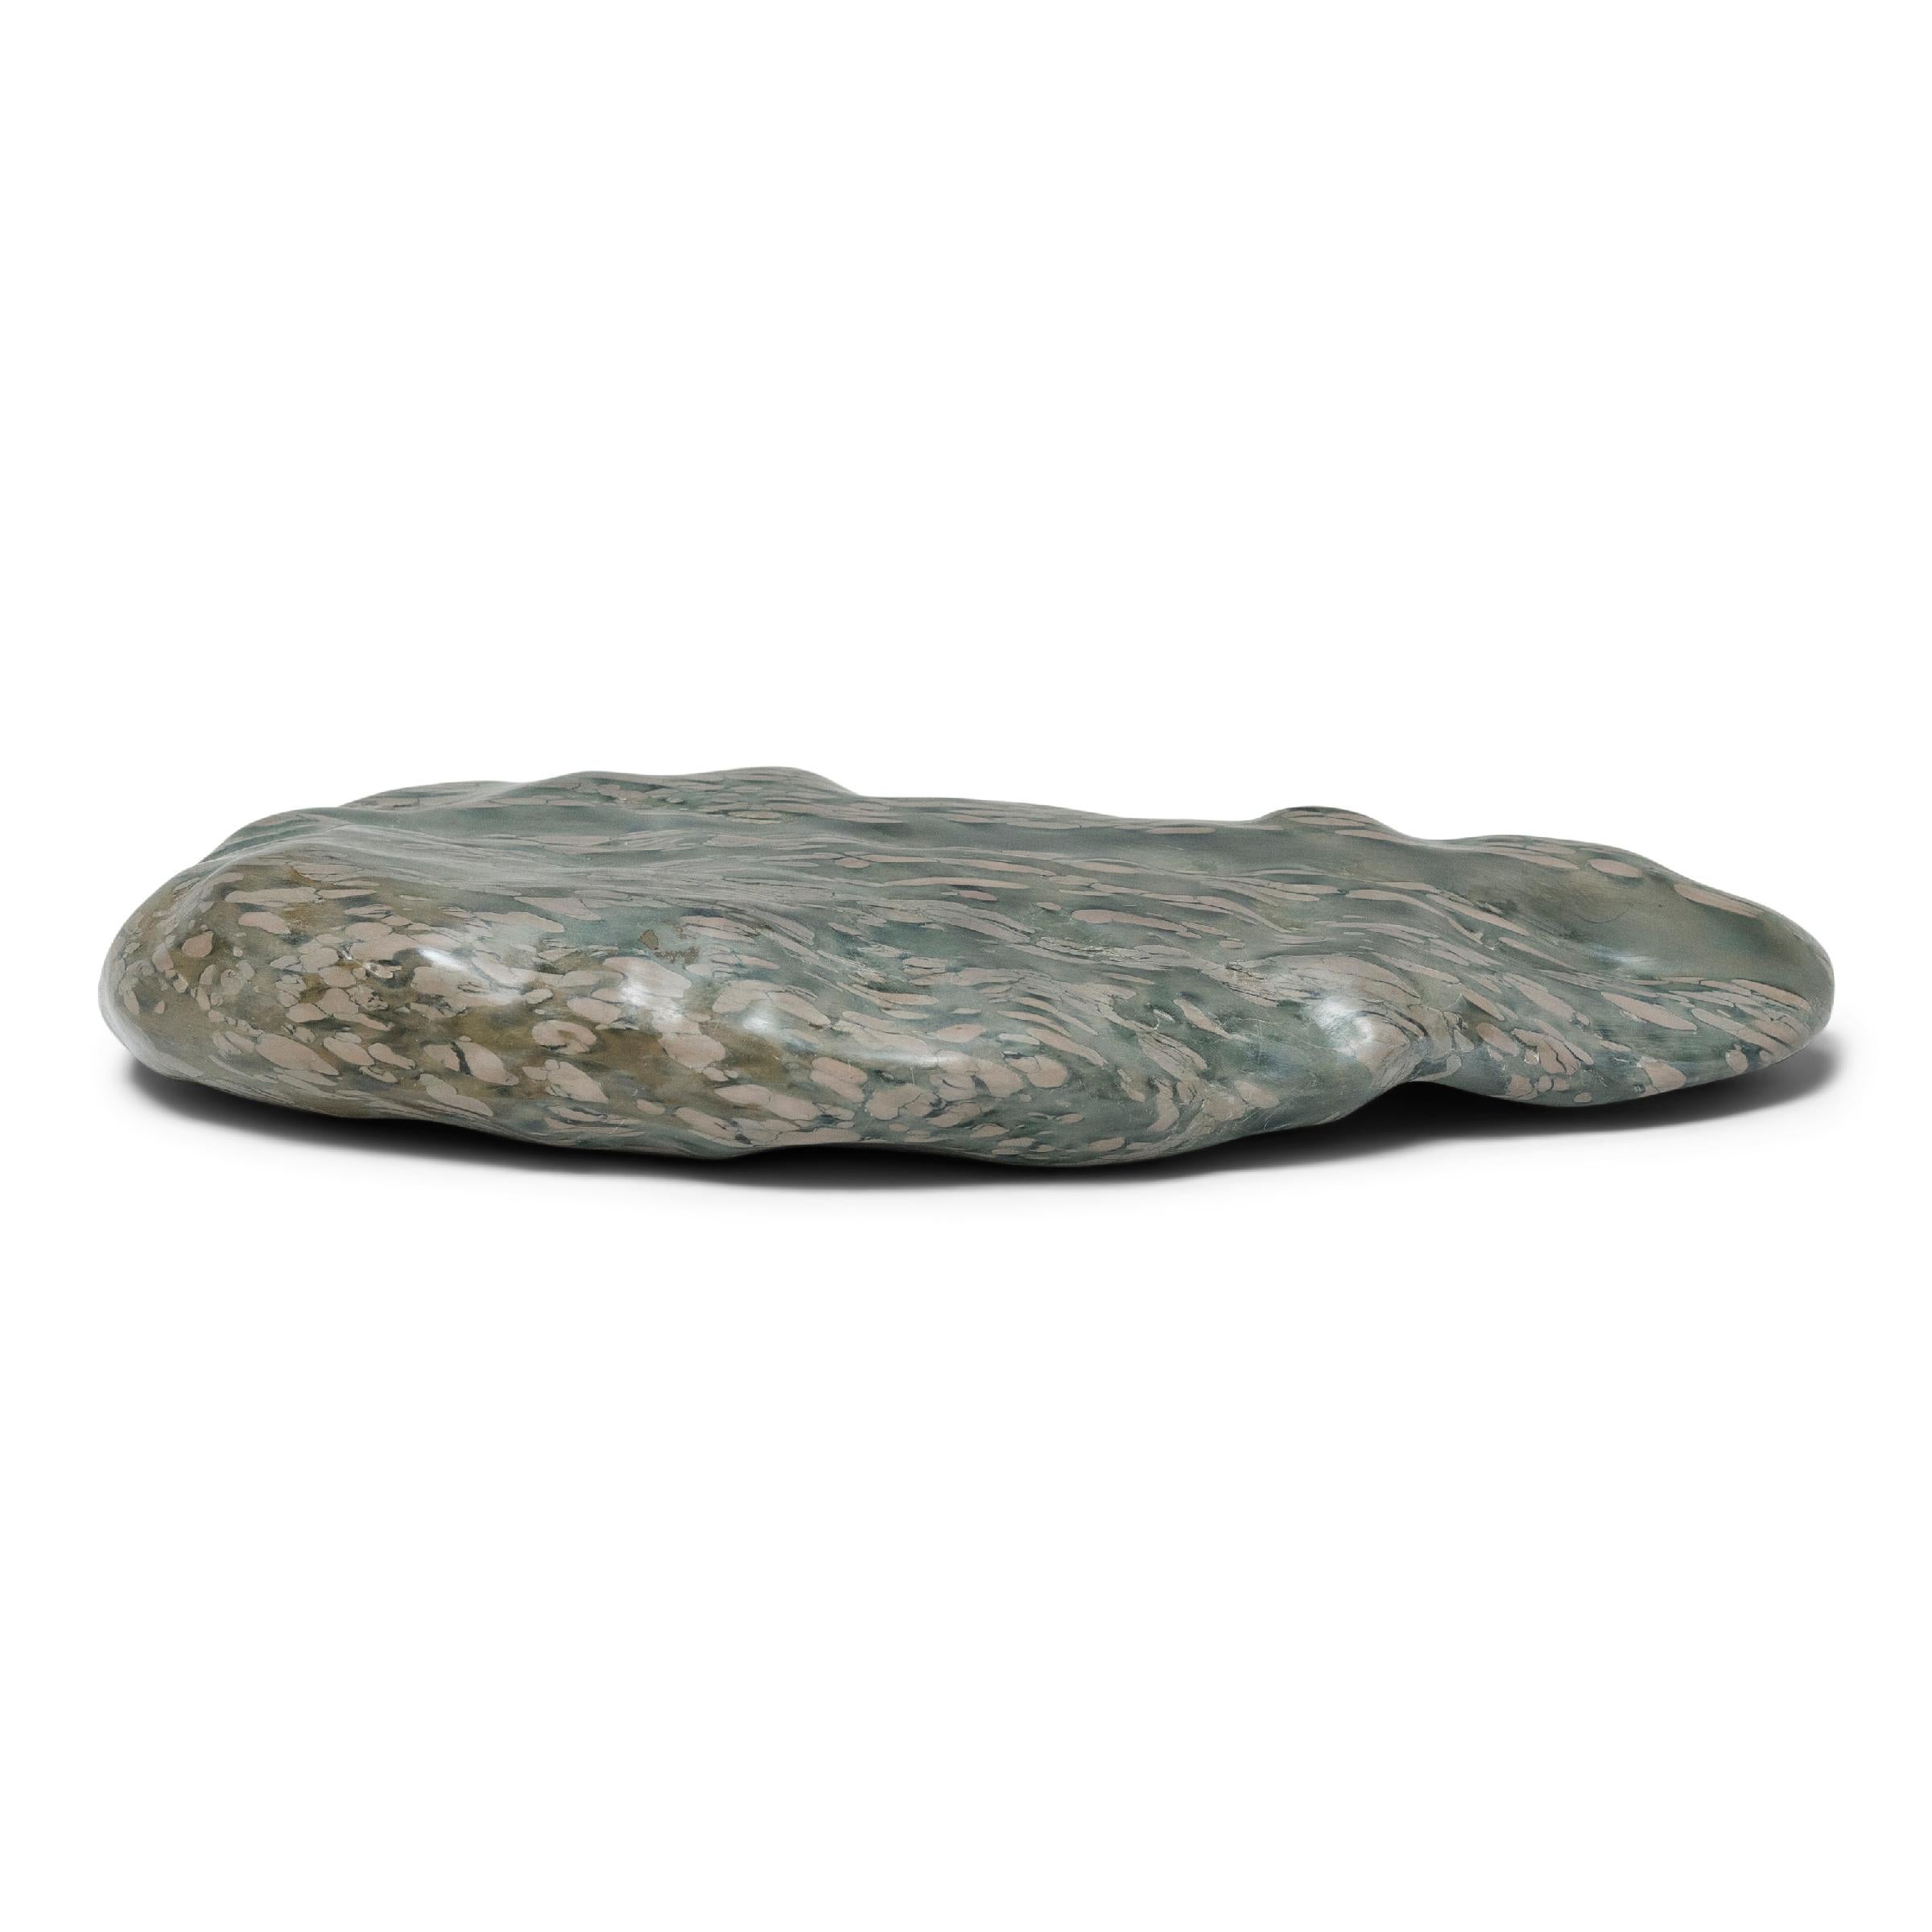 A well-chosen stone is the focal point of both a traditional Chinese garden and a scholar's studio - evoking the complexities of nature and inspiring creative thought. This sculptural zhenzhu stone, also known as pearl stone or puddingstone, is a